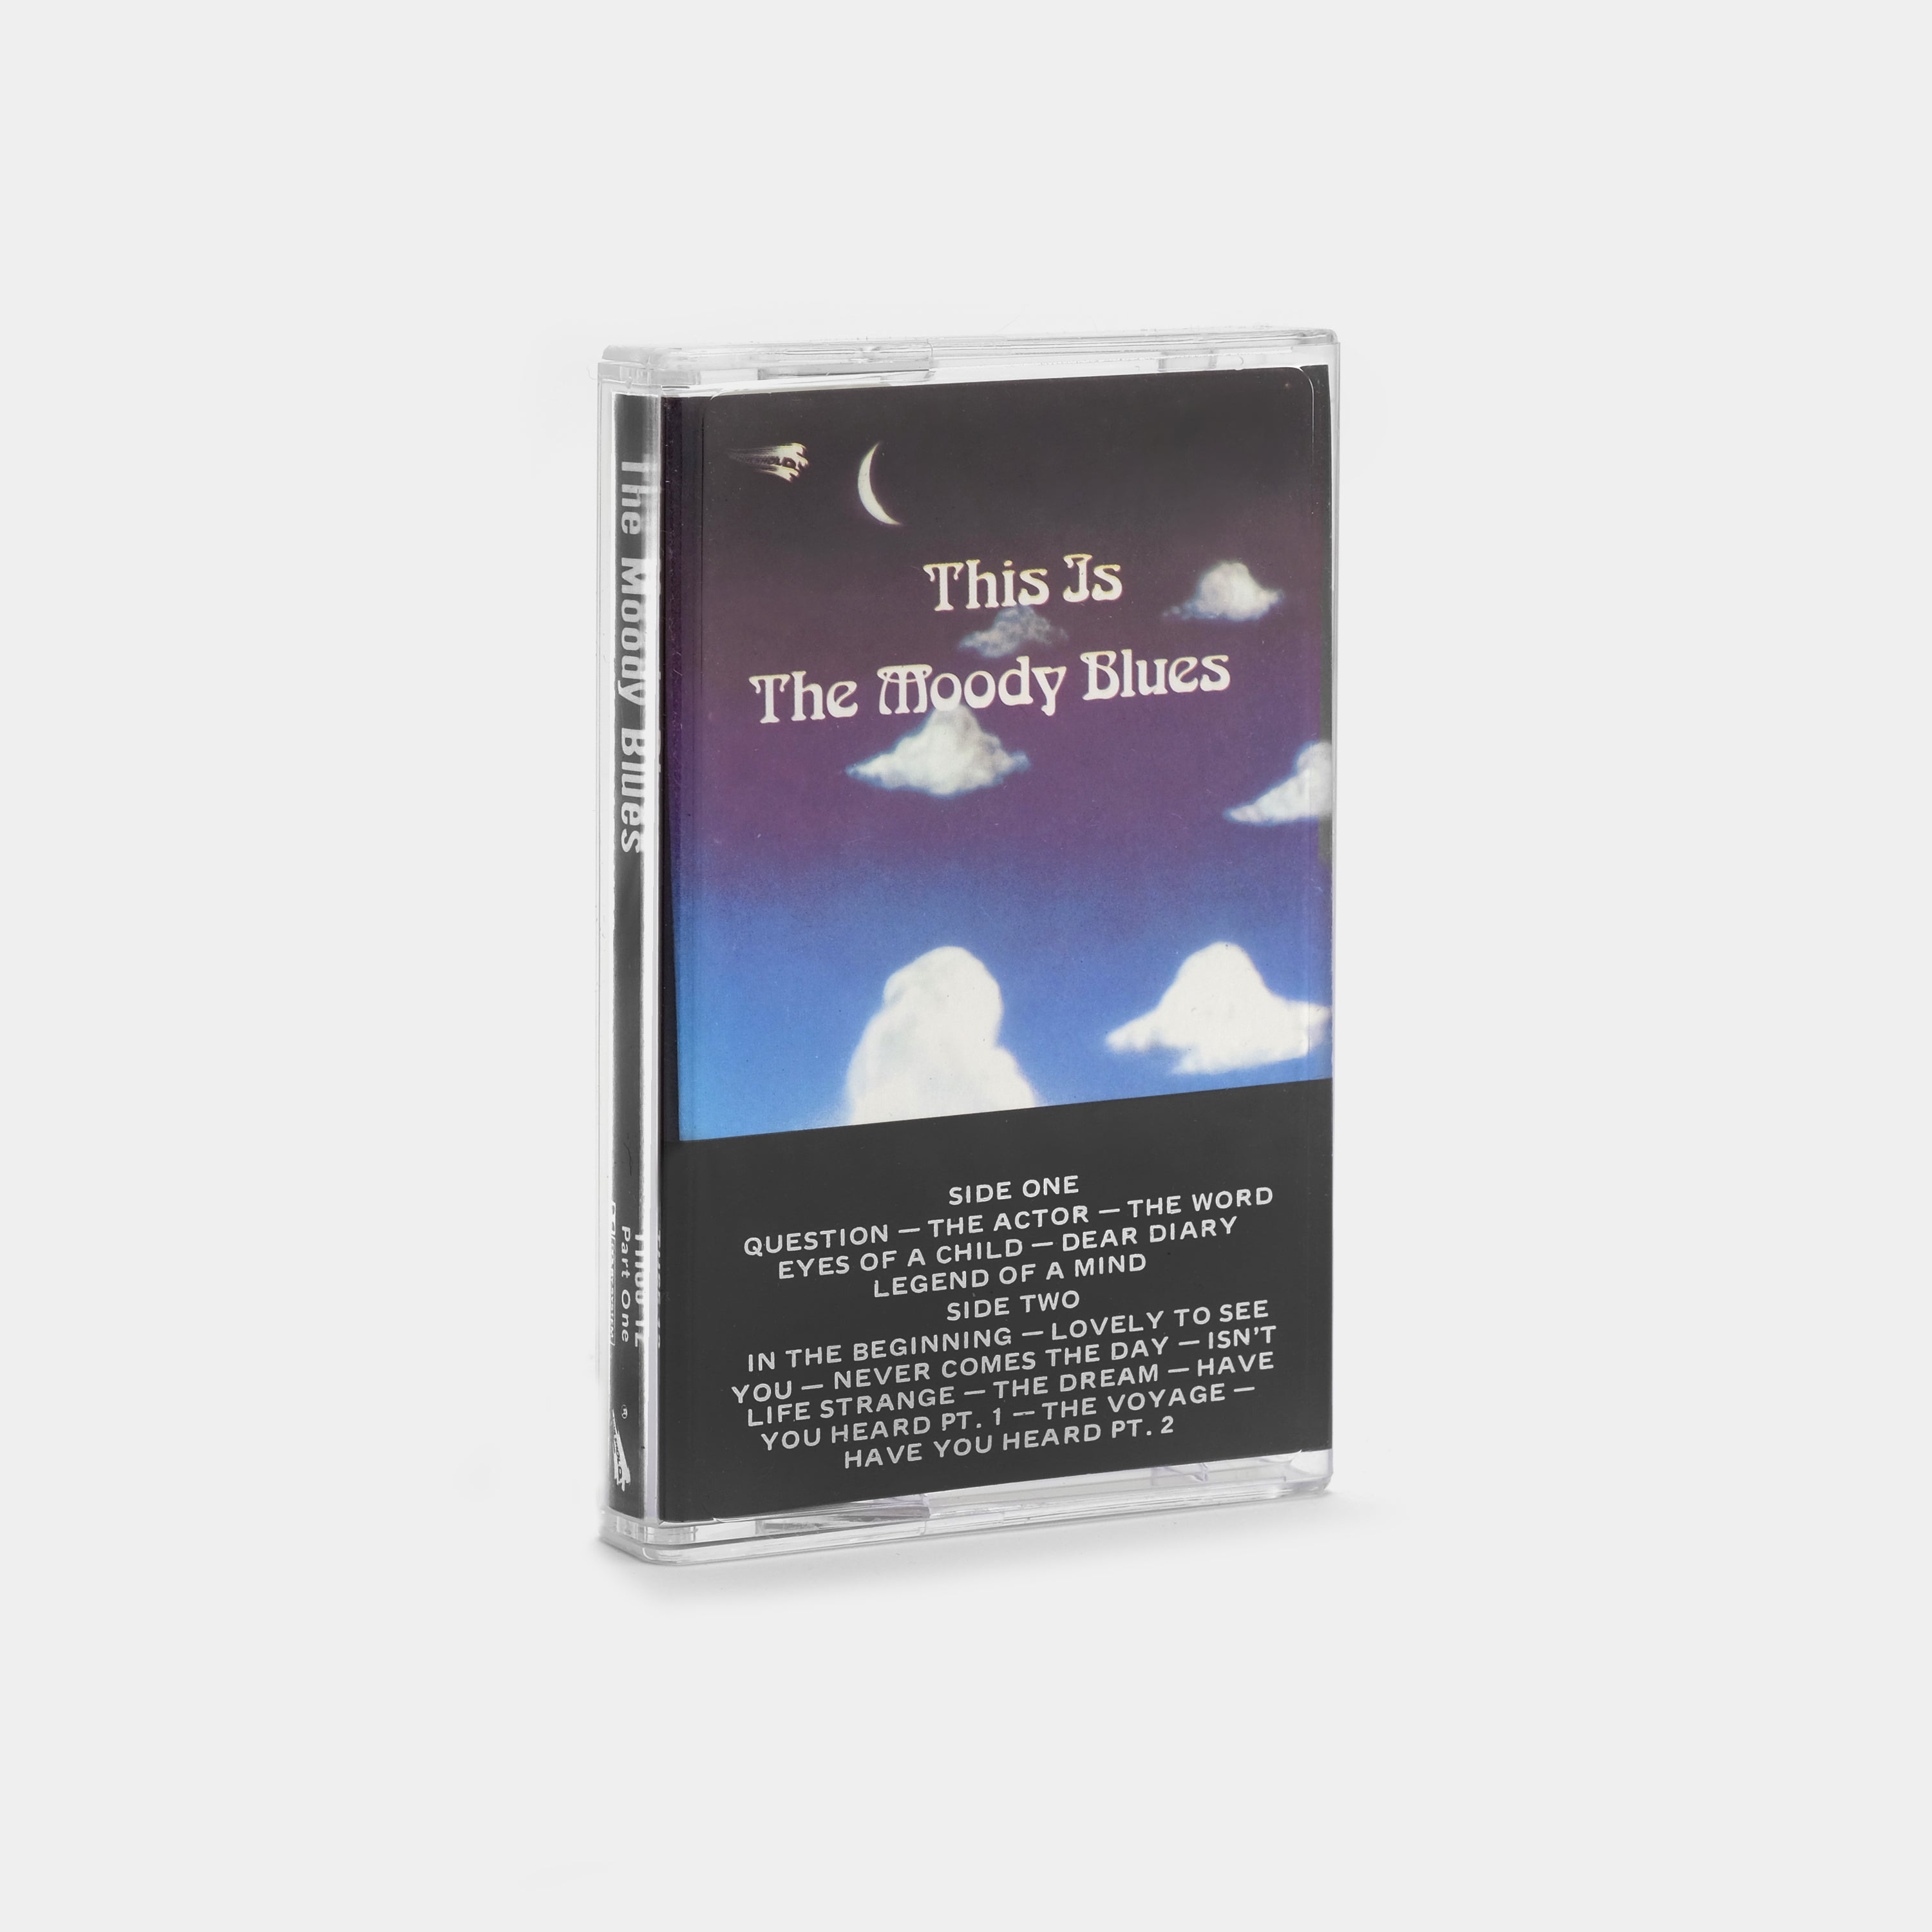 The Moody Blues - This Is The Moody Blues (Part One) Cassette Tape